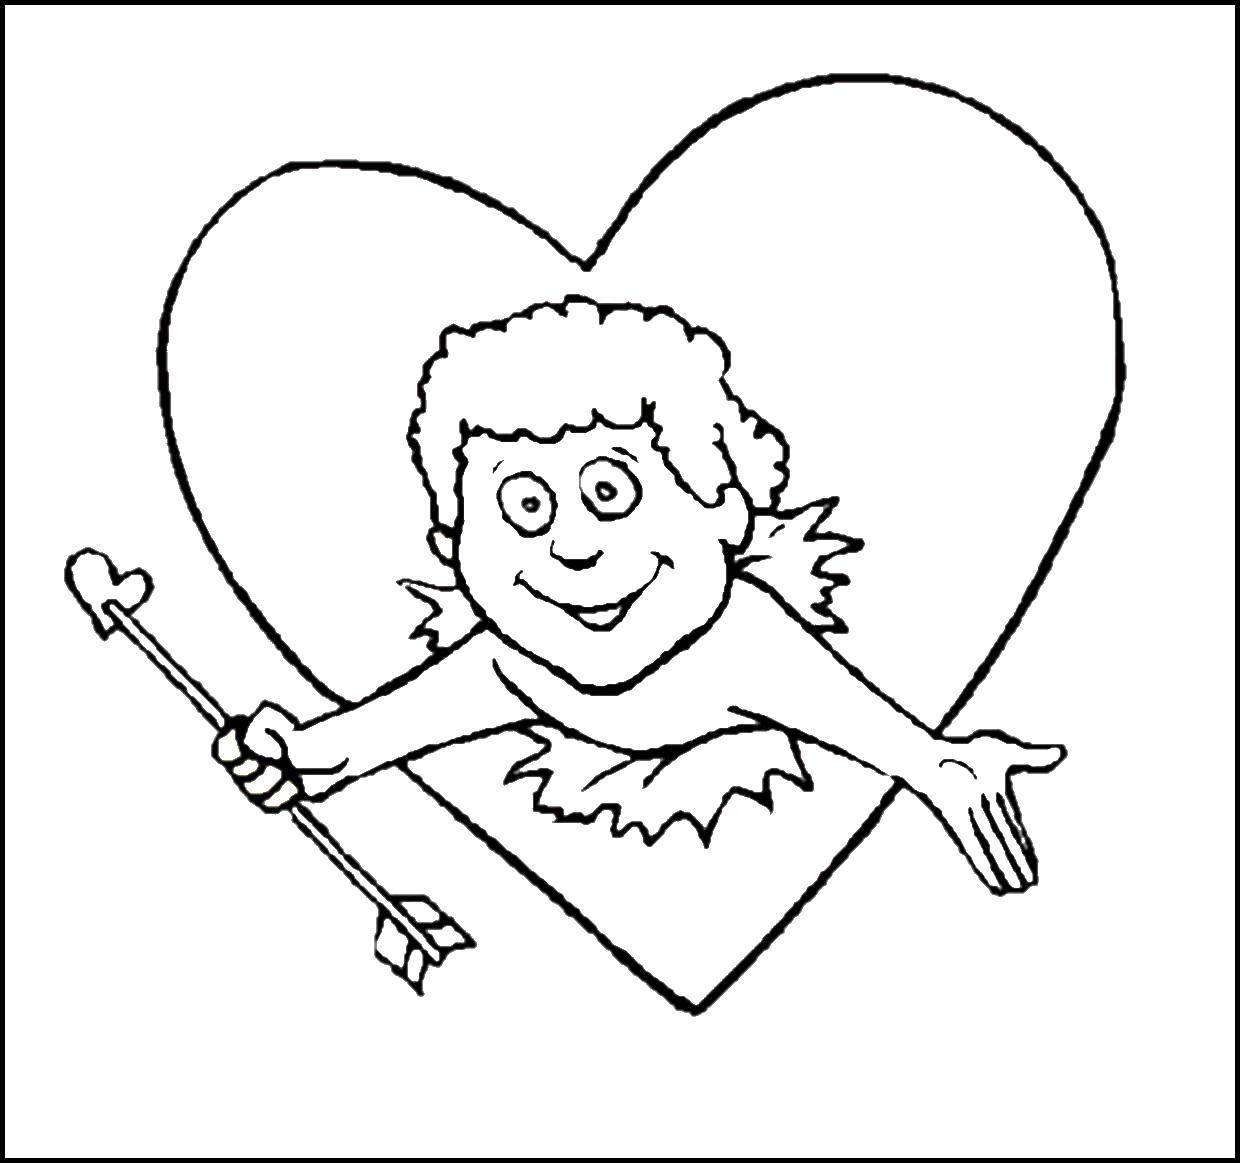 Coloring Cupid with a heart. Category Valentines day. Tags:  Valentines day, love, Cupid.